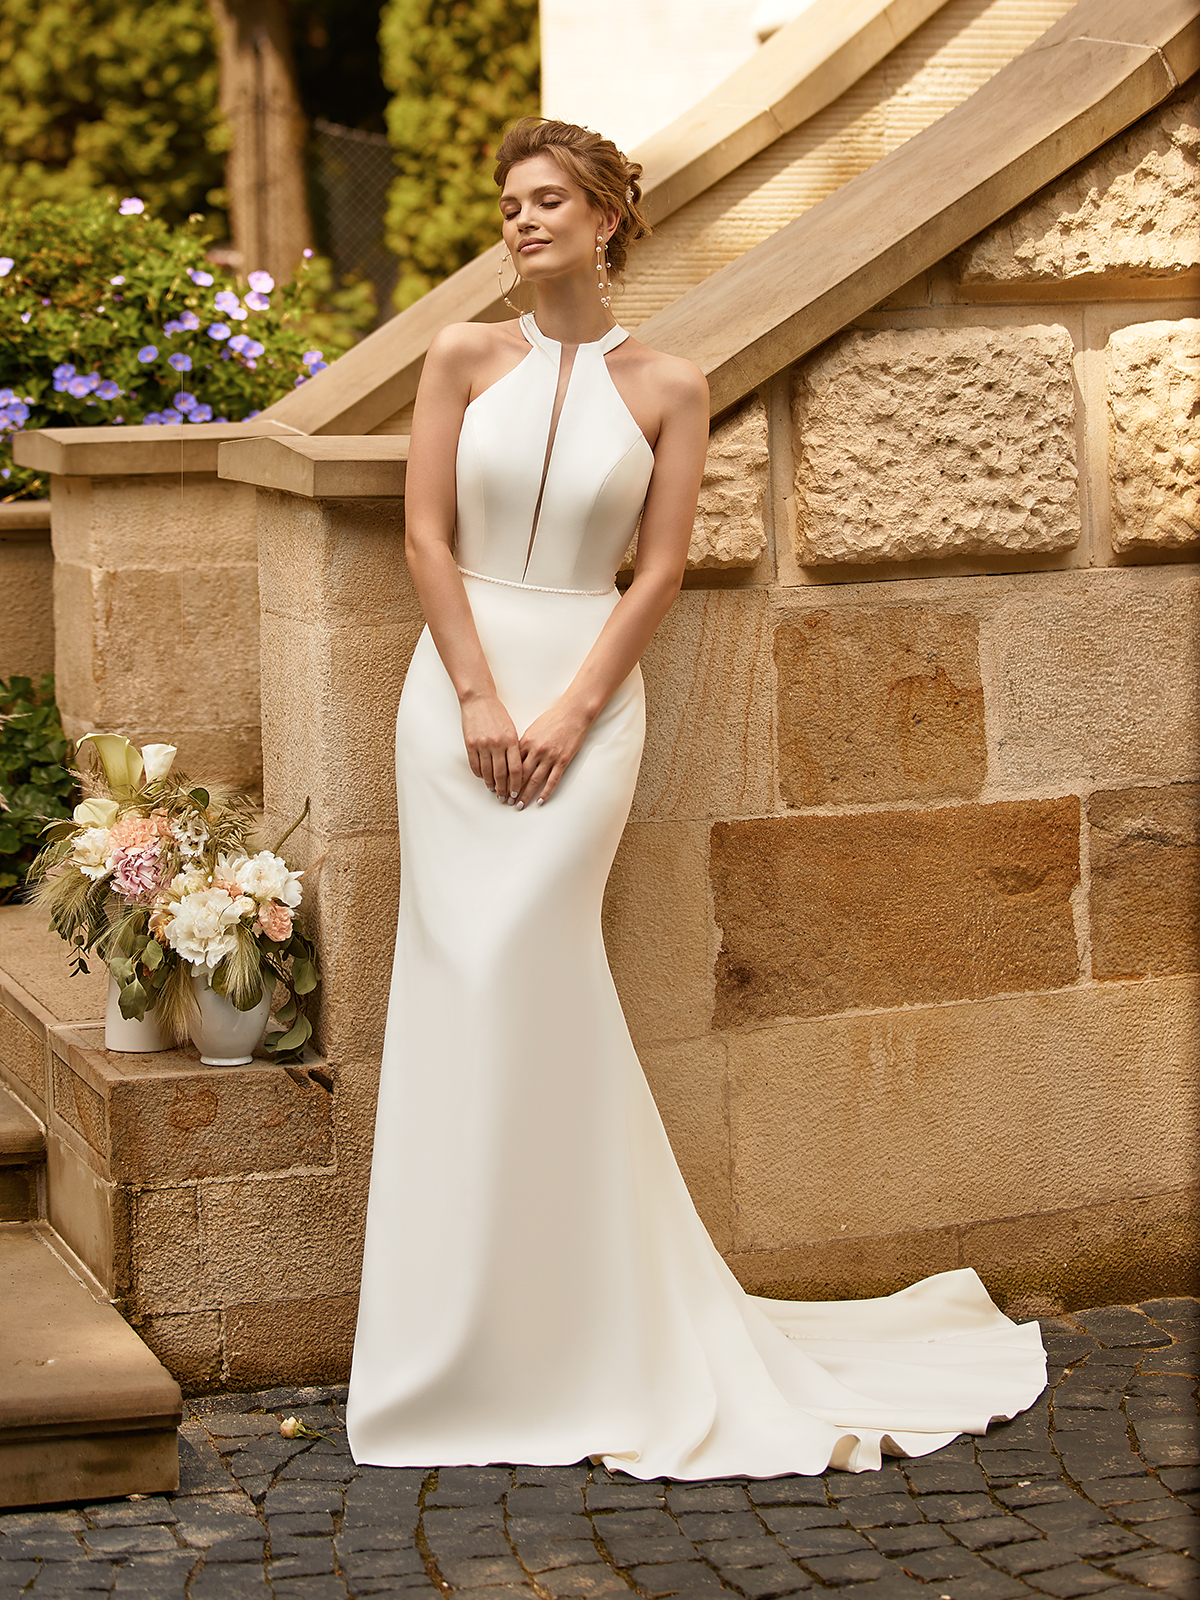 Wedding Dress for Tall Brides - Styles & Silhouettes to Consider